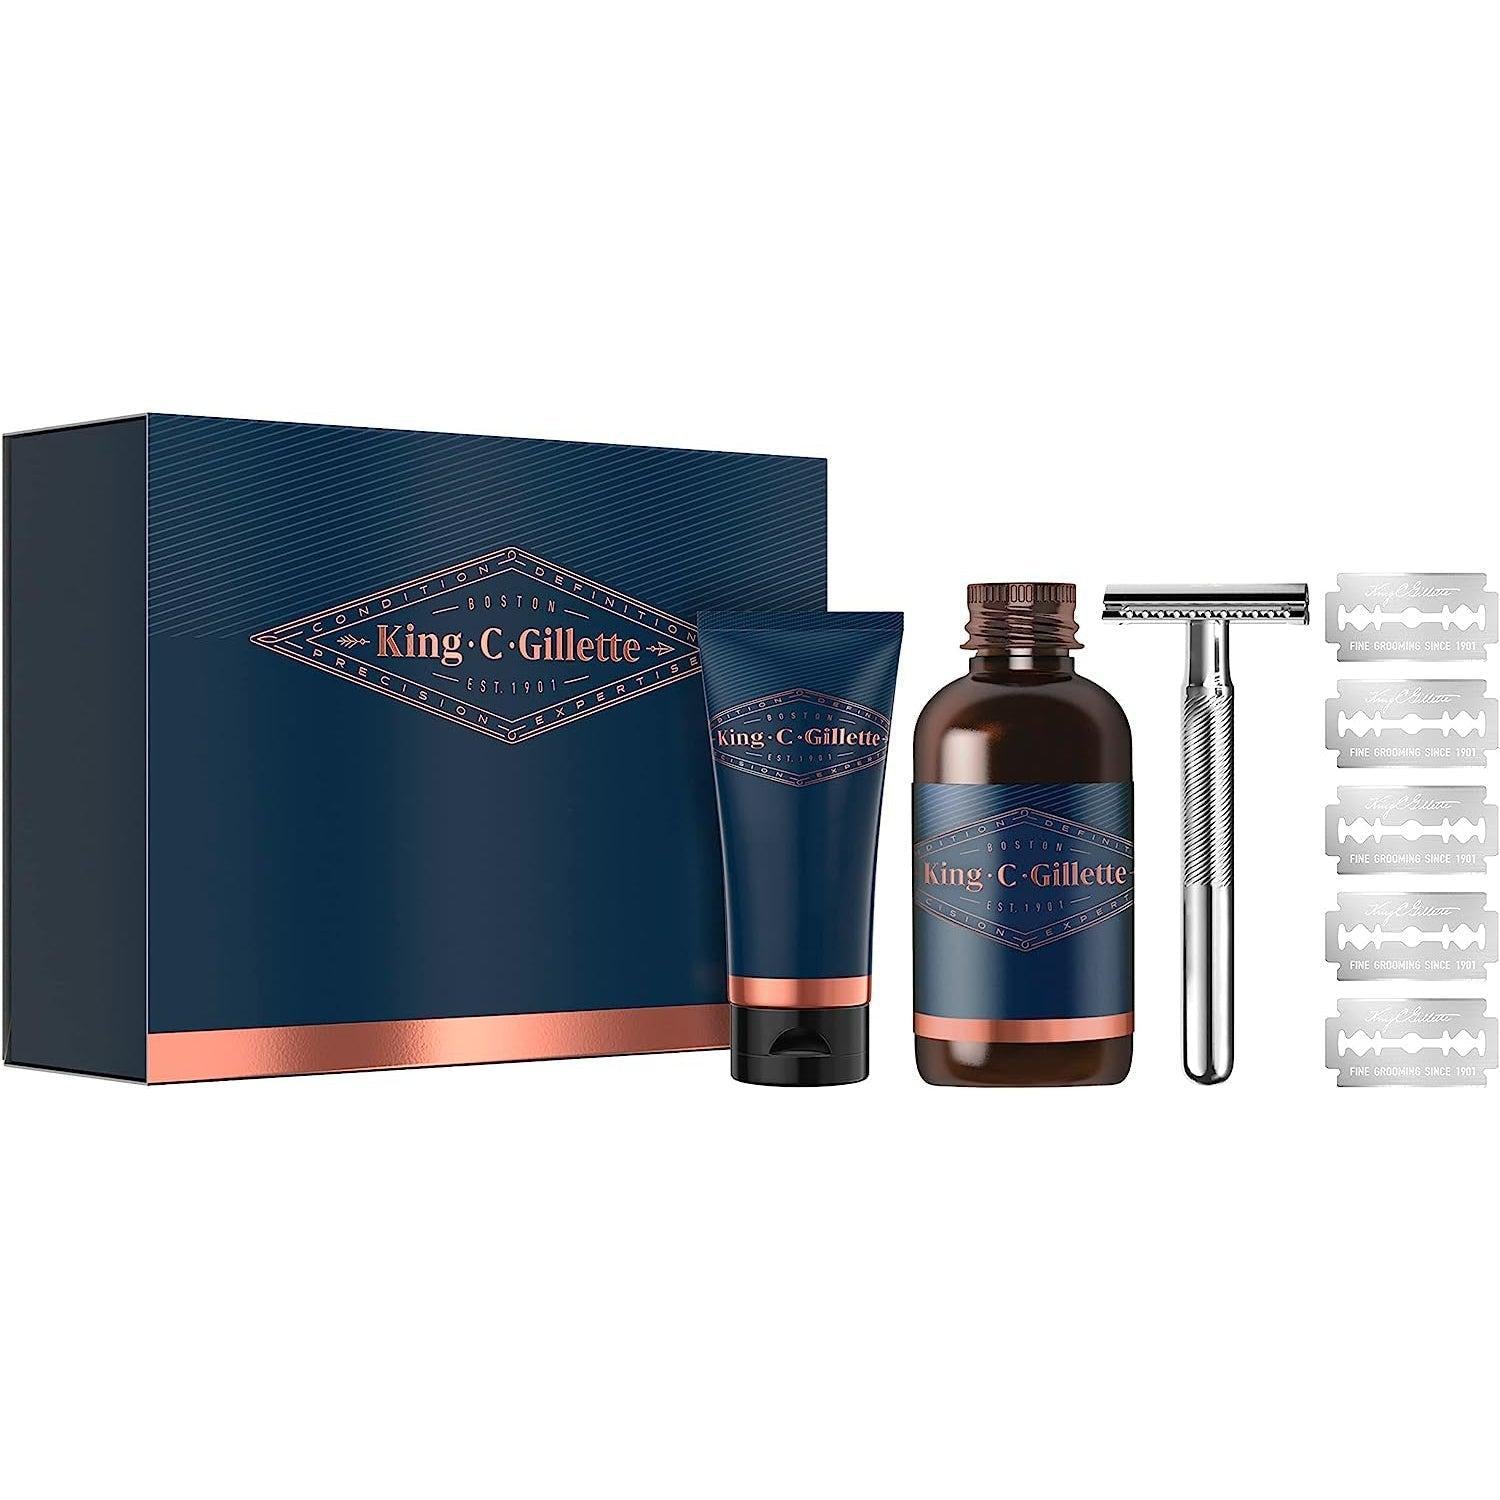 King C. Gillette Compact Beard Styling Gift Set - Healthxpress.ie